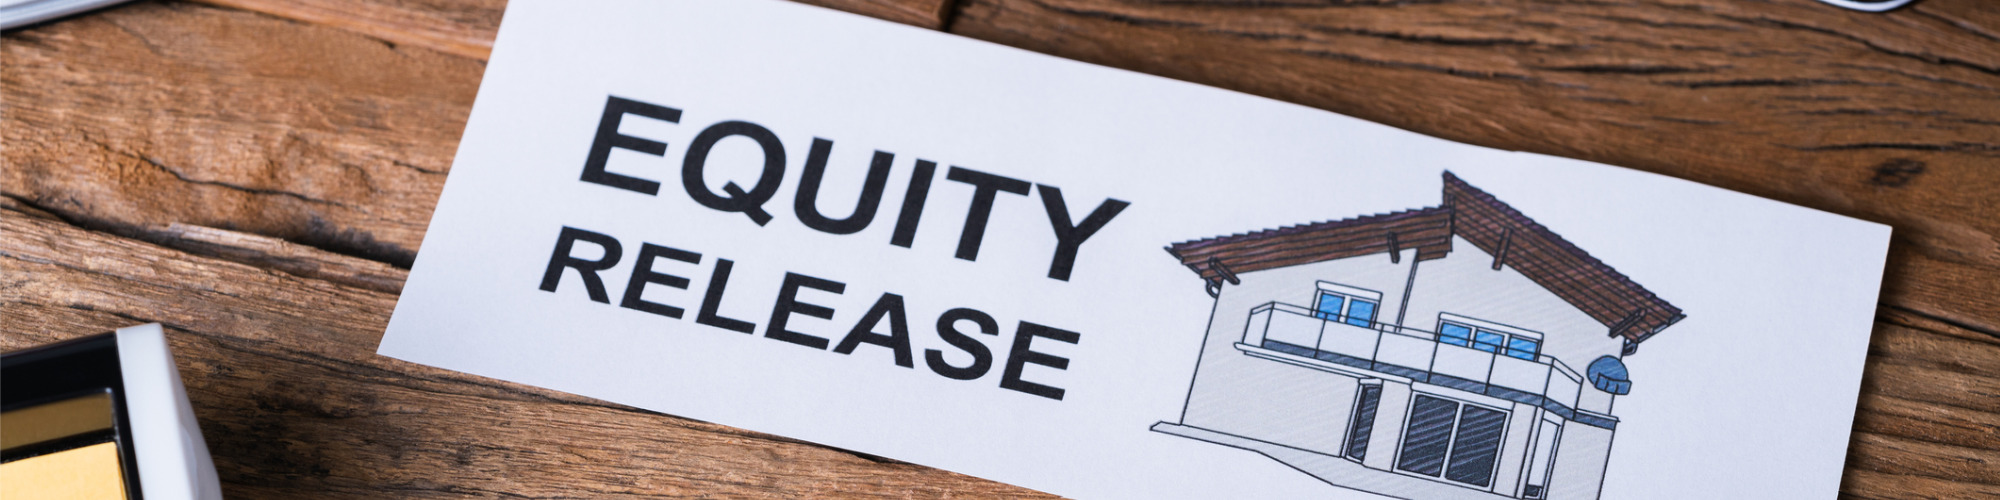 Equity Release - The Basics Live at Your Desk